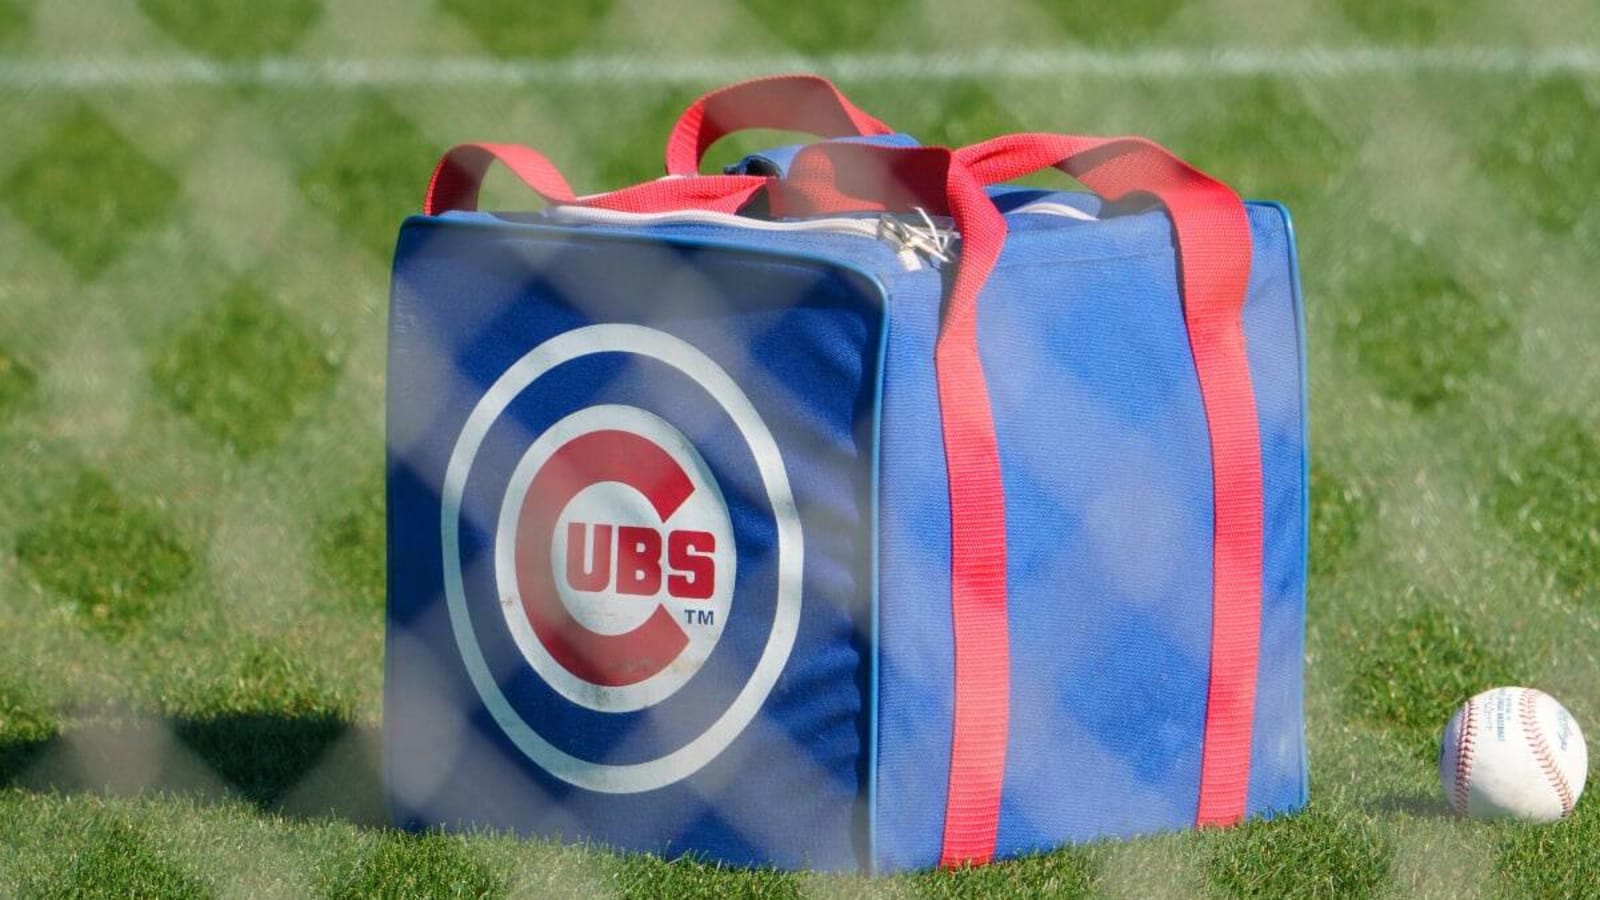 On This Day in History: The Cubs Hire a New Manager